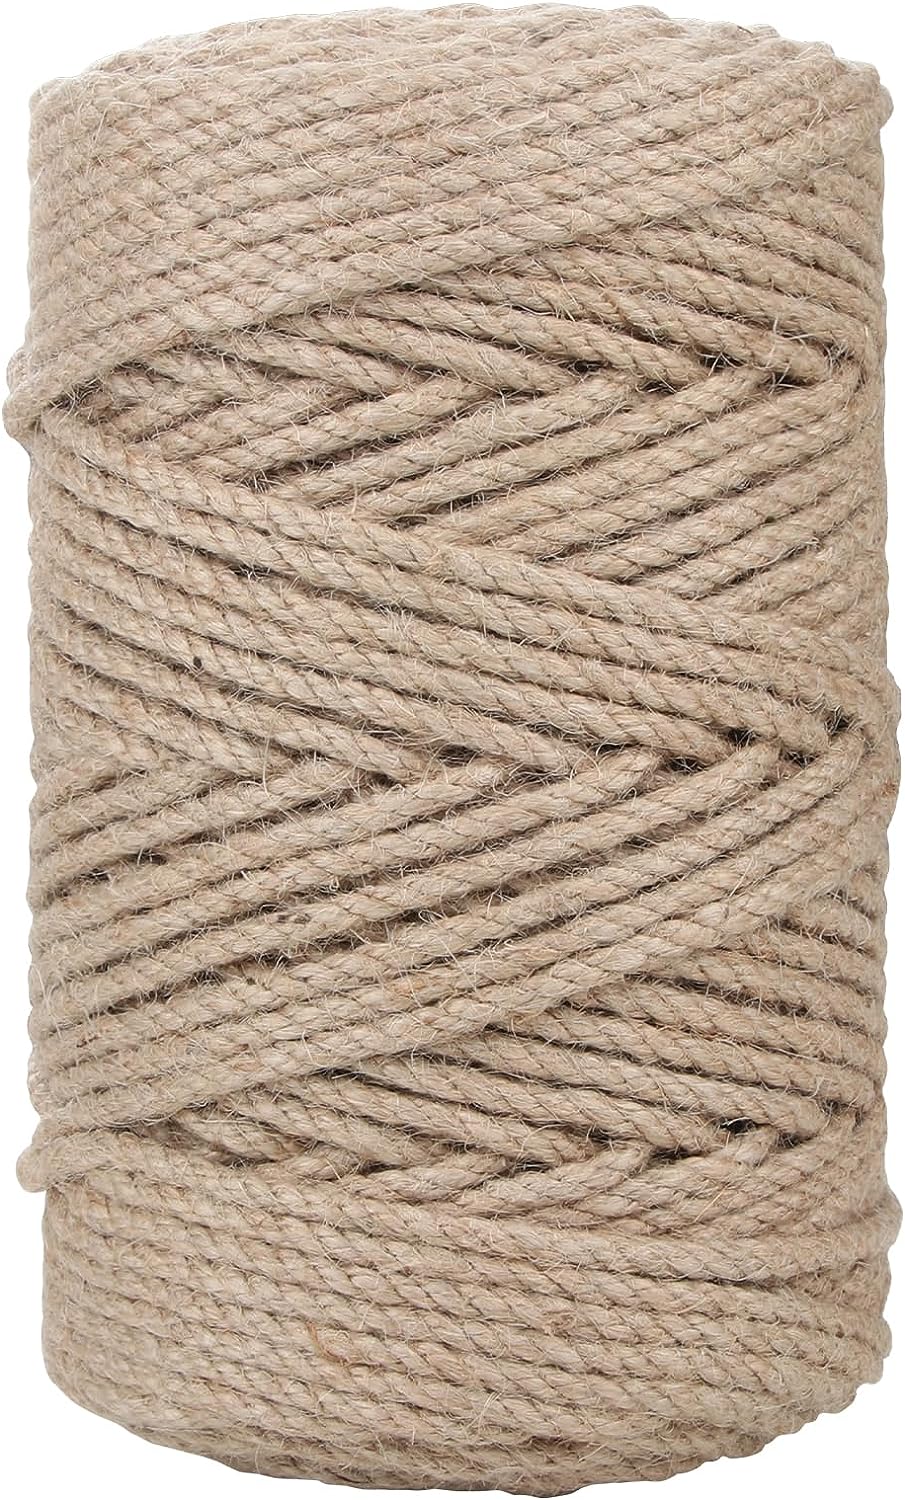 Natural White String,984 Feet Christmas String,Cotton String Baker  Twine,Heavy Duty Packing String for DIY Crafts and Gift Wrapping-2mm